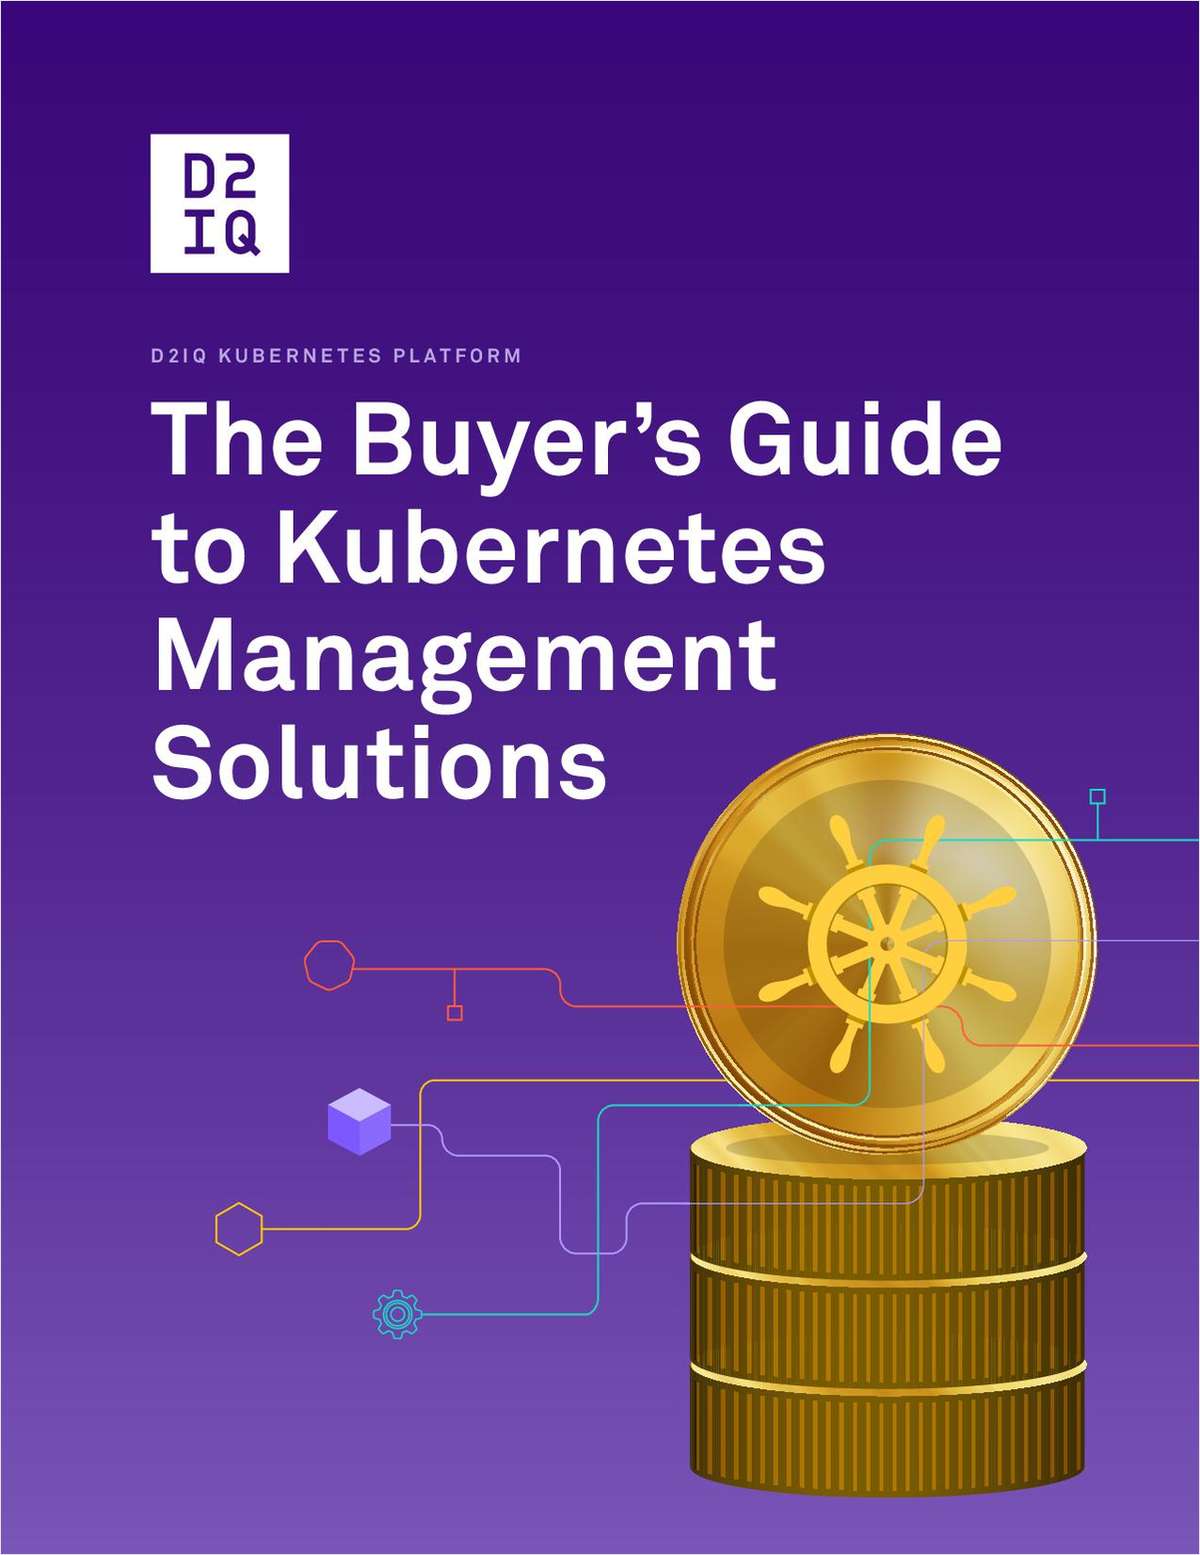 The Buyer's Guide to Kubernetes Management Solutions